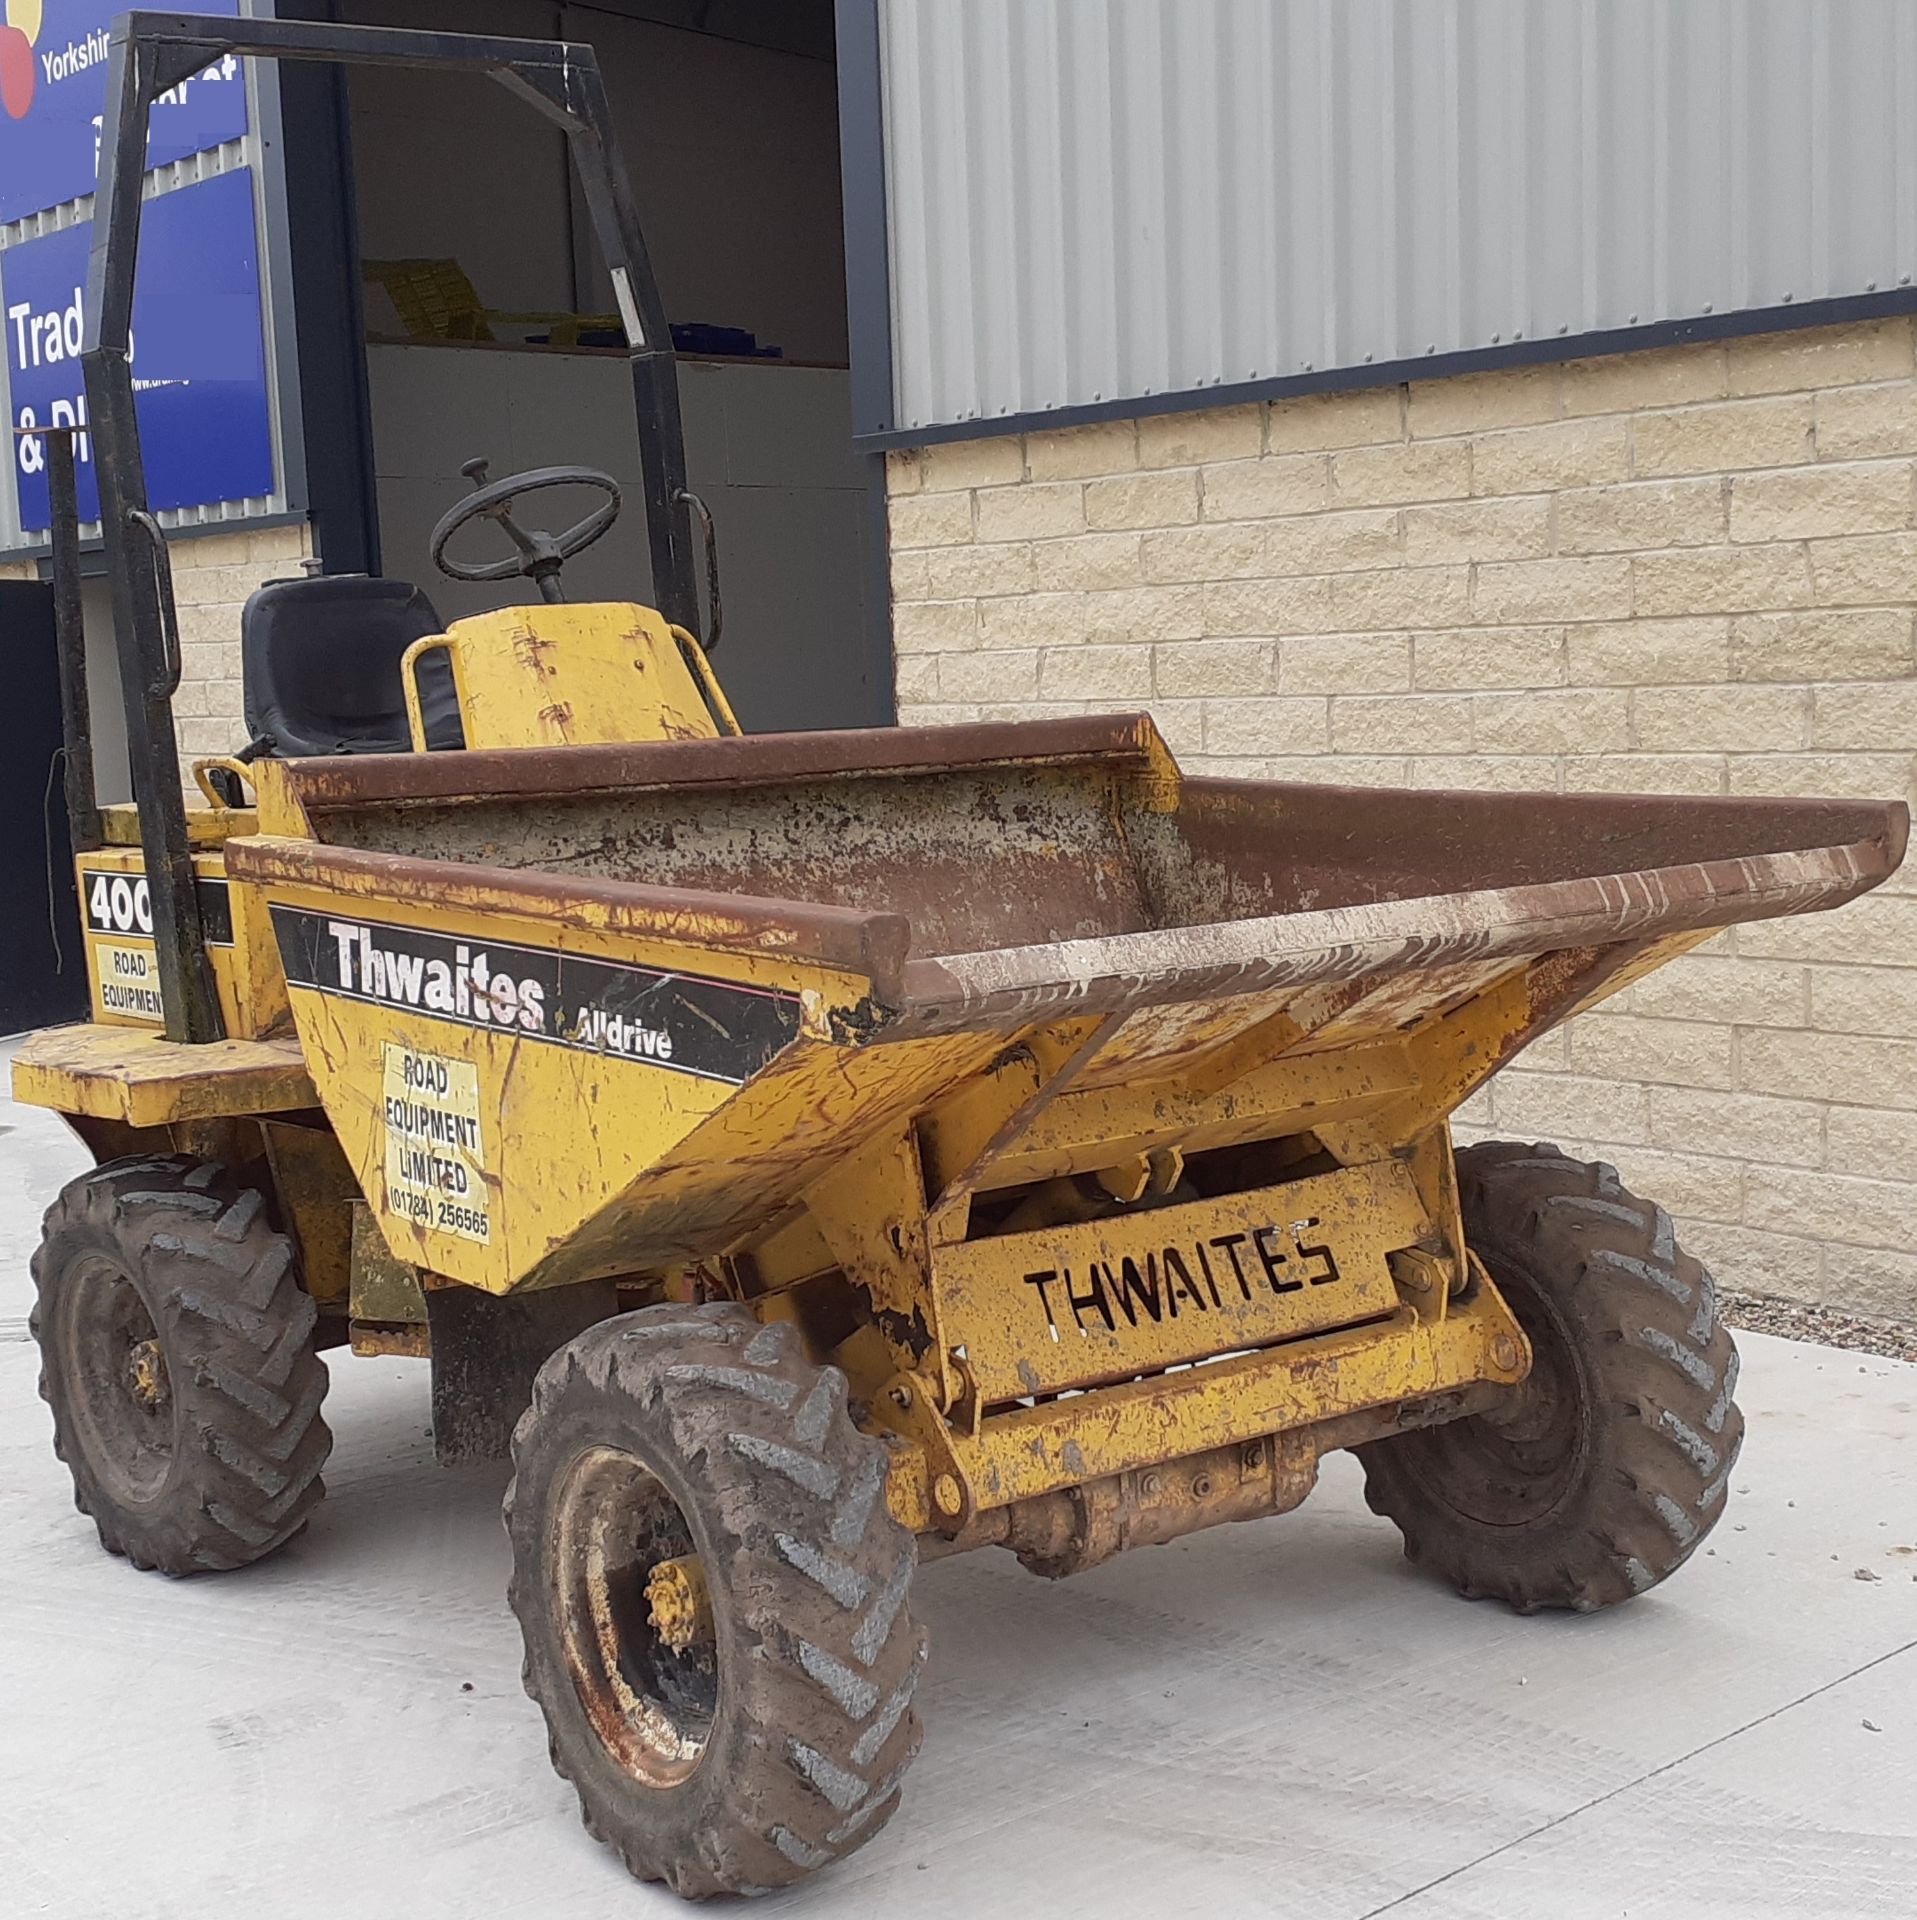 THWAITES 2 TONNE DUMPER, STARTS DRIVES TIPS, CHASSIS PLATE SHOWS 1998, WAS ROAD REGISTERED IN 2001 - Image 2 of 5